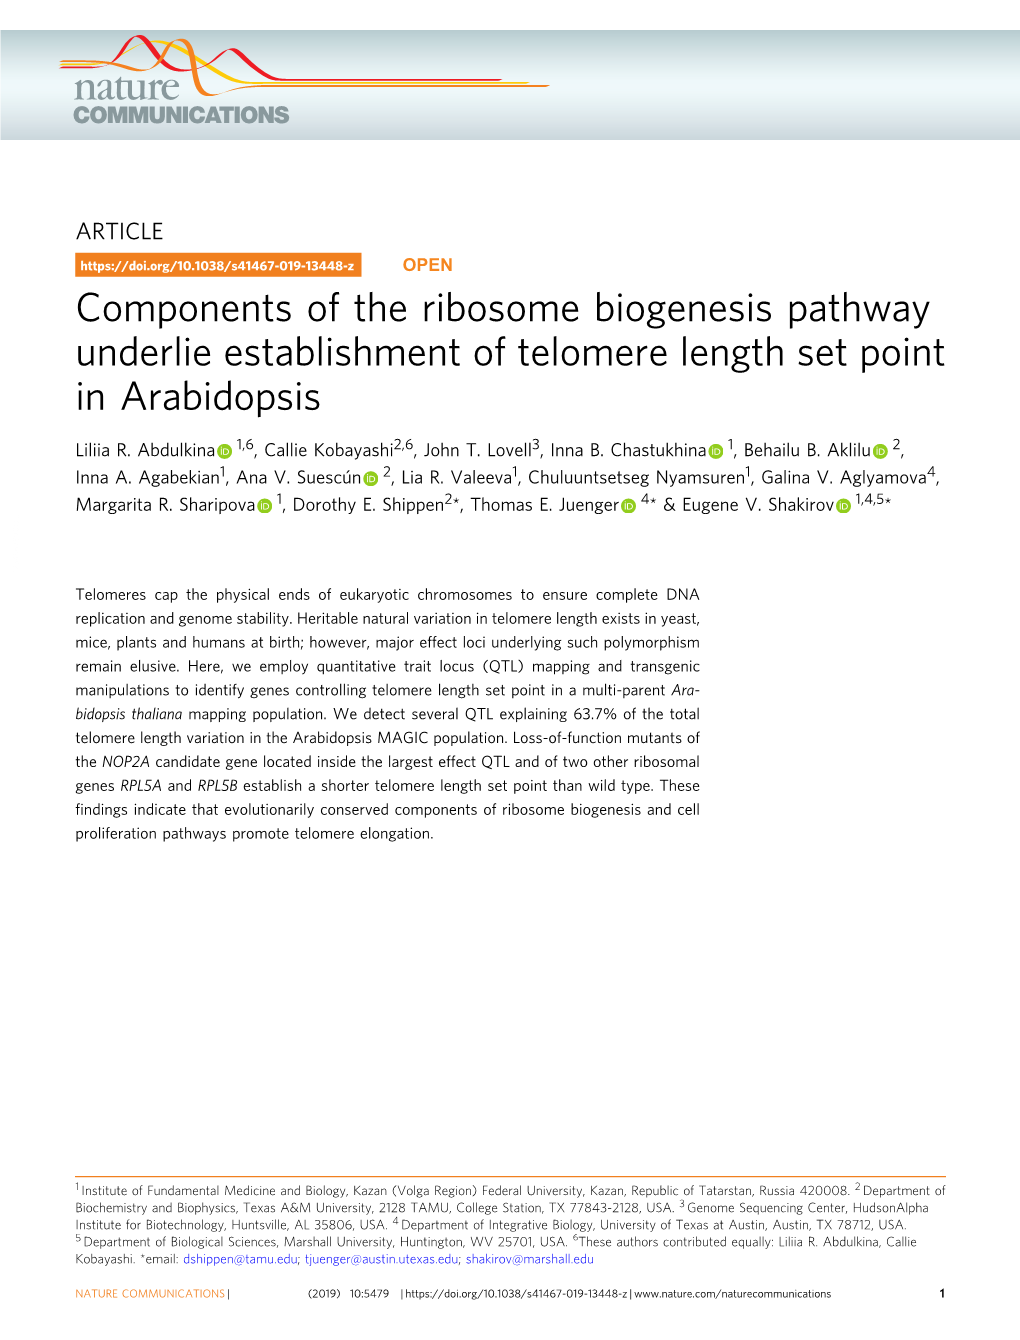 Components of the Ribosome Biogenesis Pathway Underlie Establishment of Telomere Length Set Point in Arabidopsis